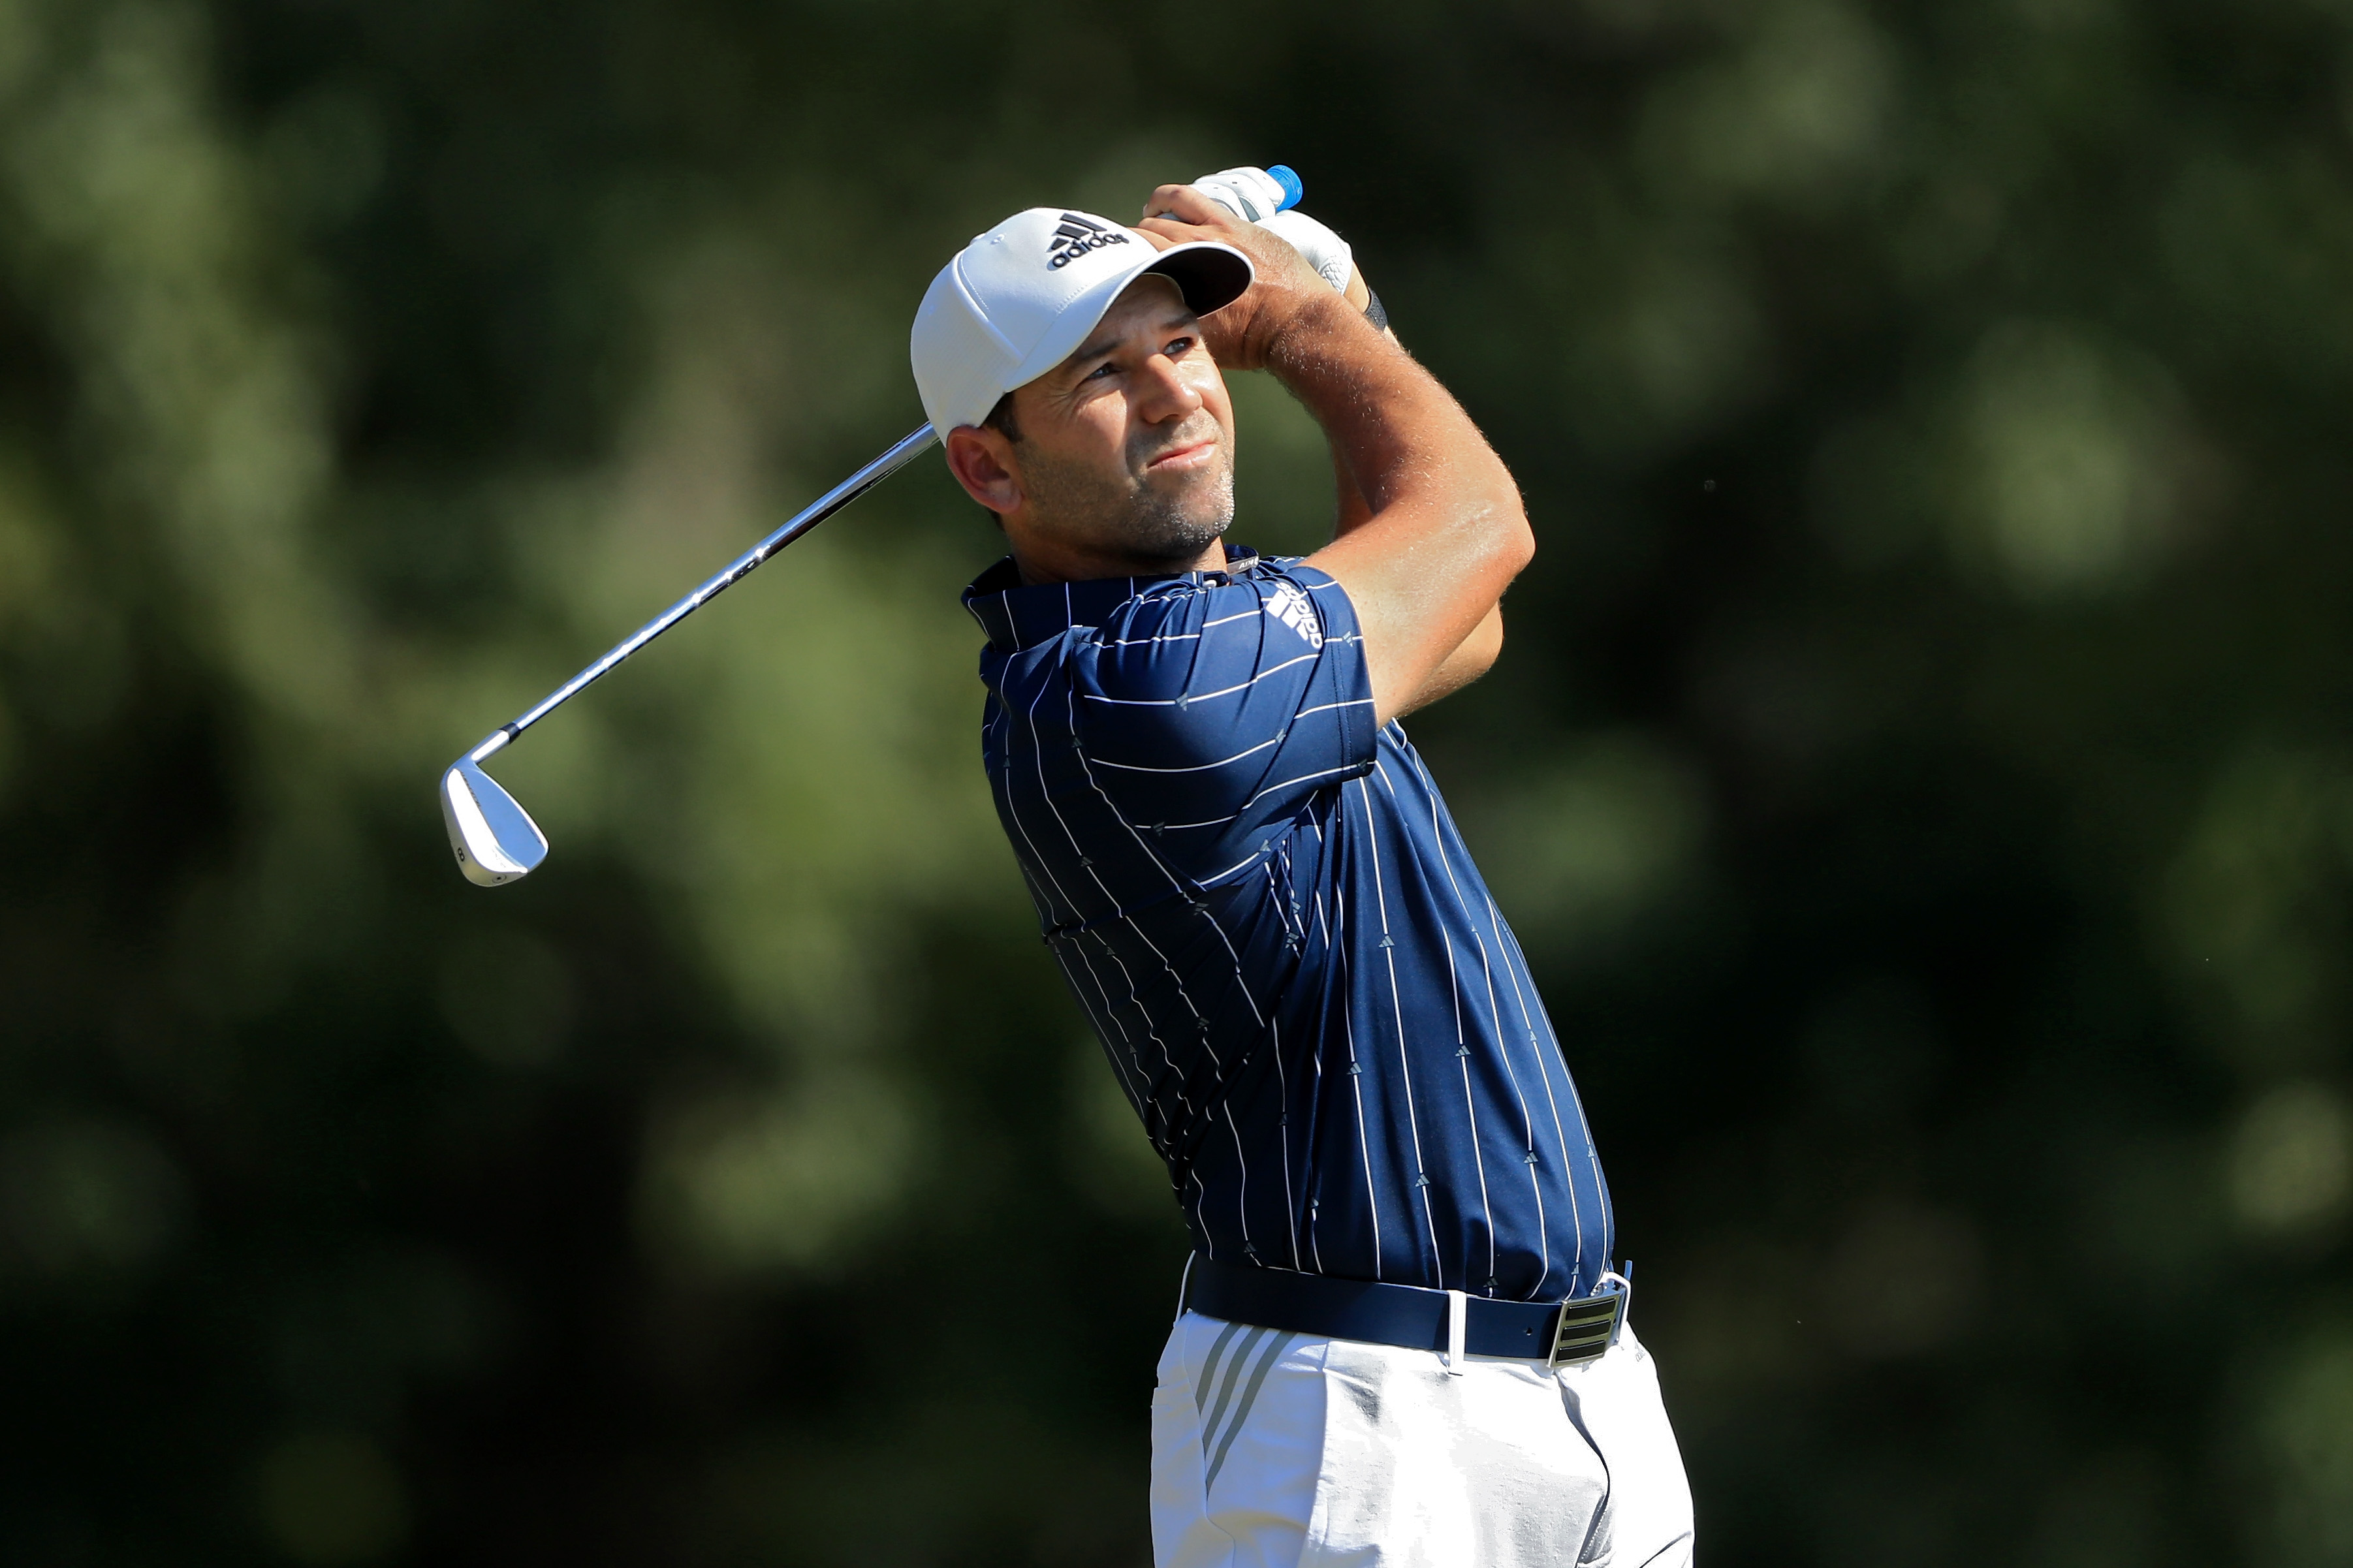 miembro impulso Odiseo The clubs Sergio Garcia used to win the 2020 Sanderson Farms Championship |  Golf News and Tour Information | Golf Digest